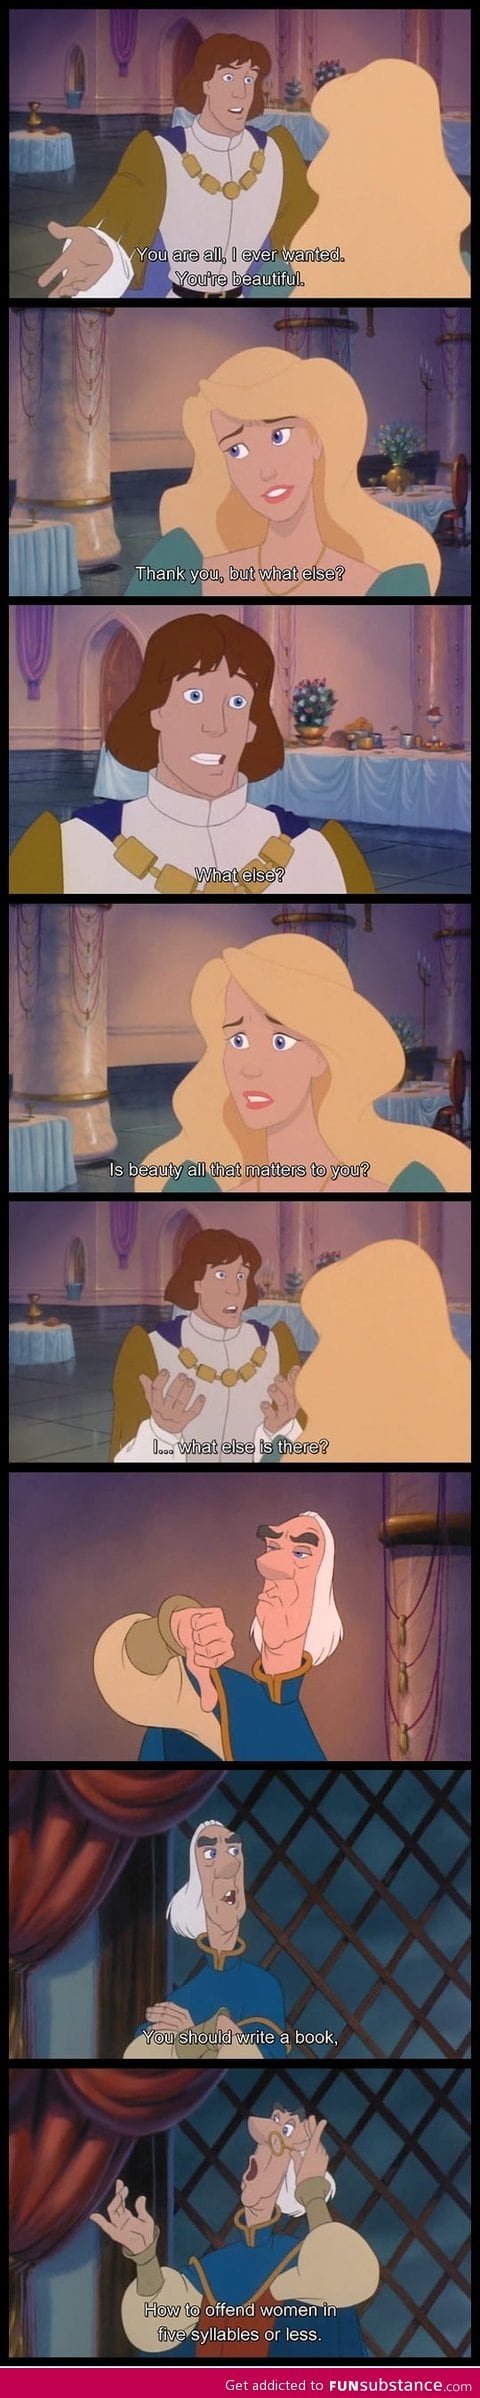 From the swan princess, how not to talk to women